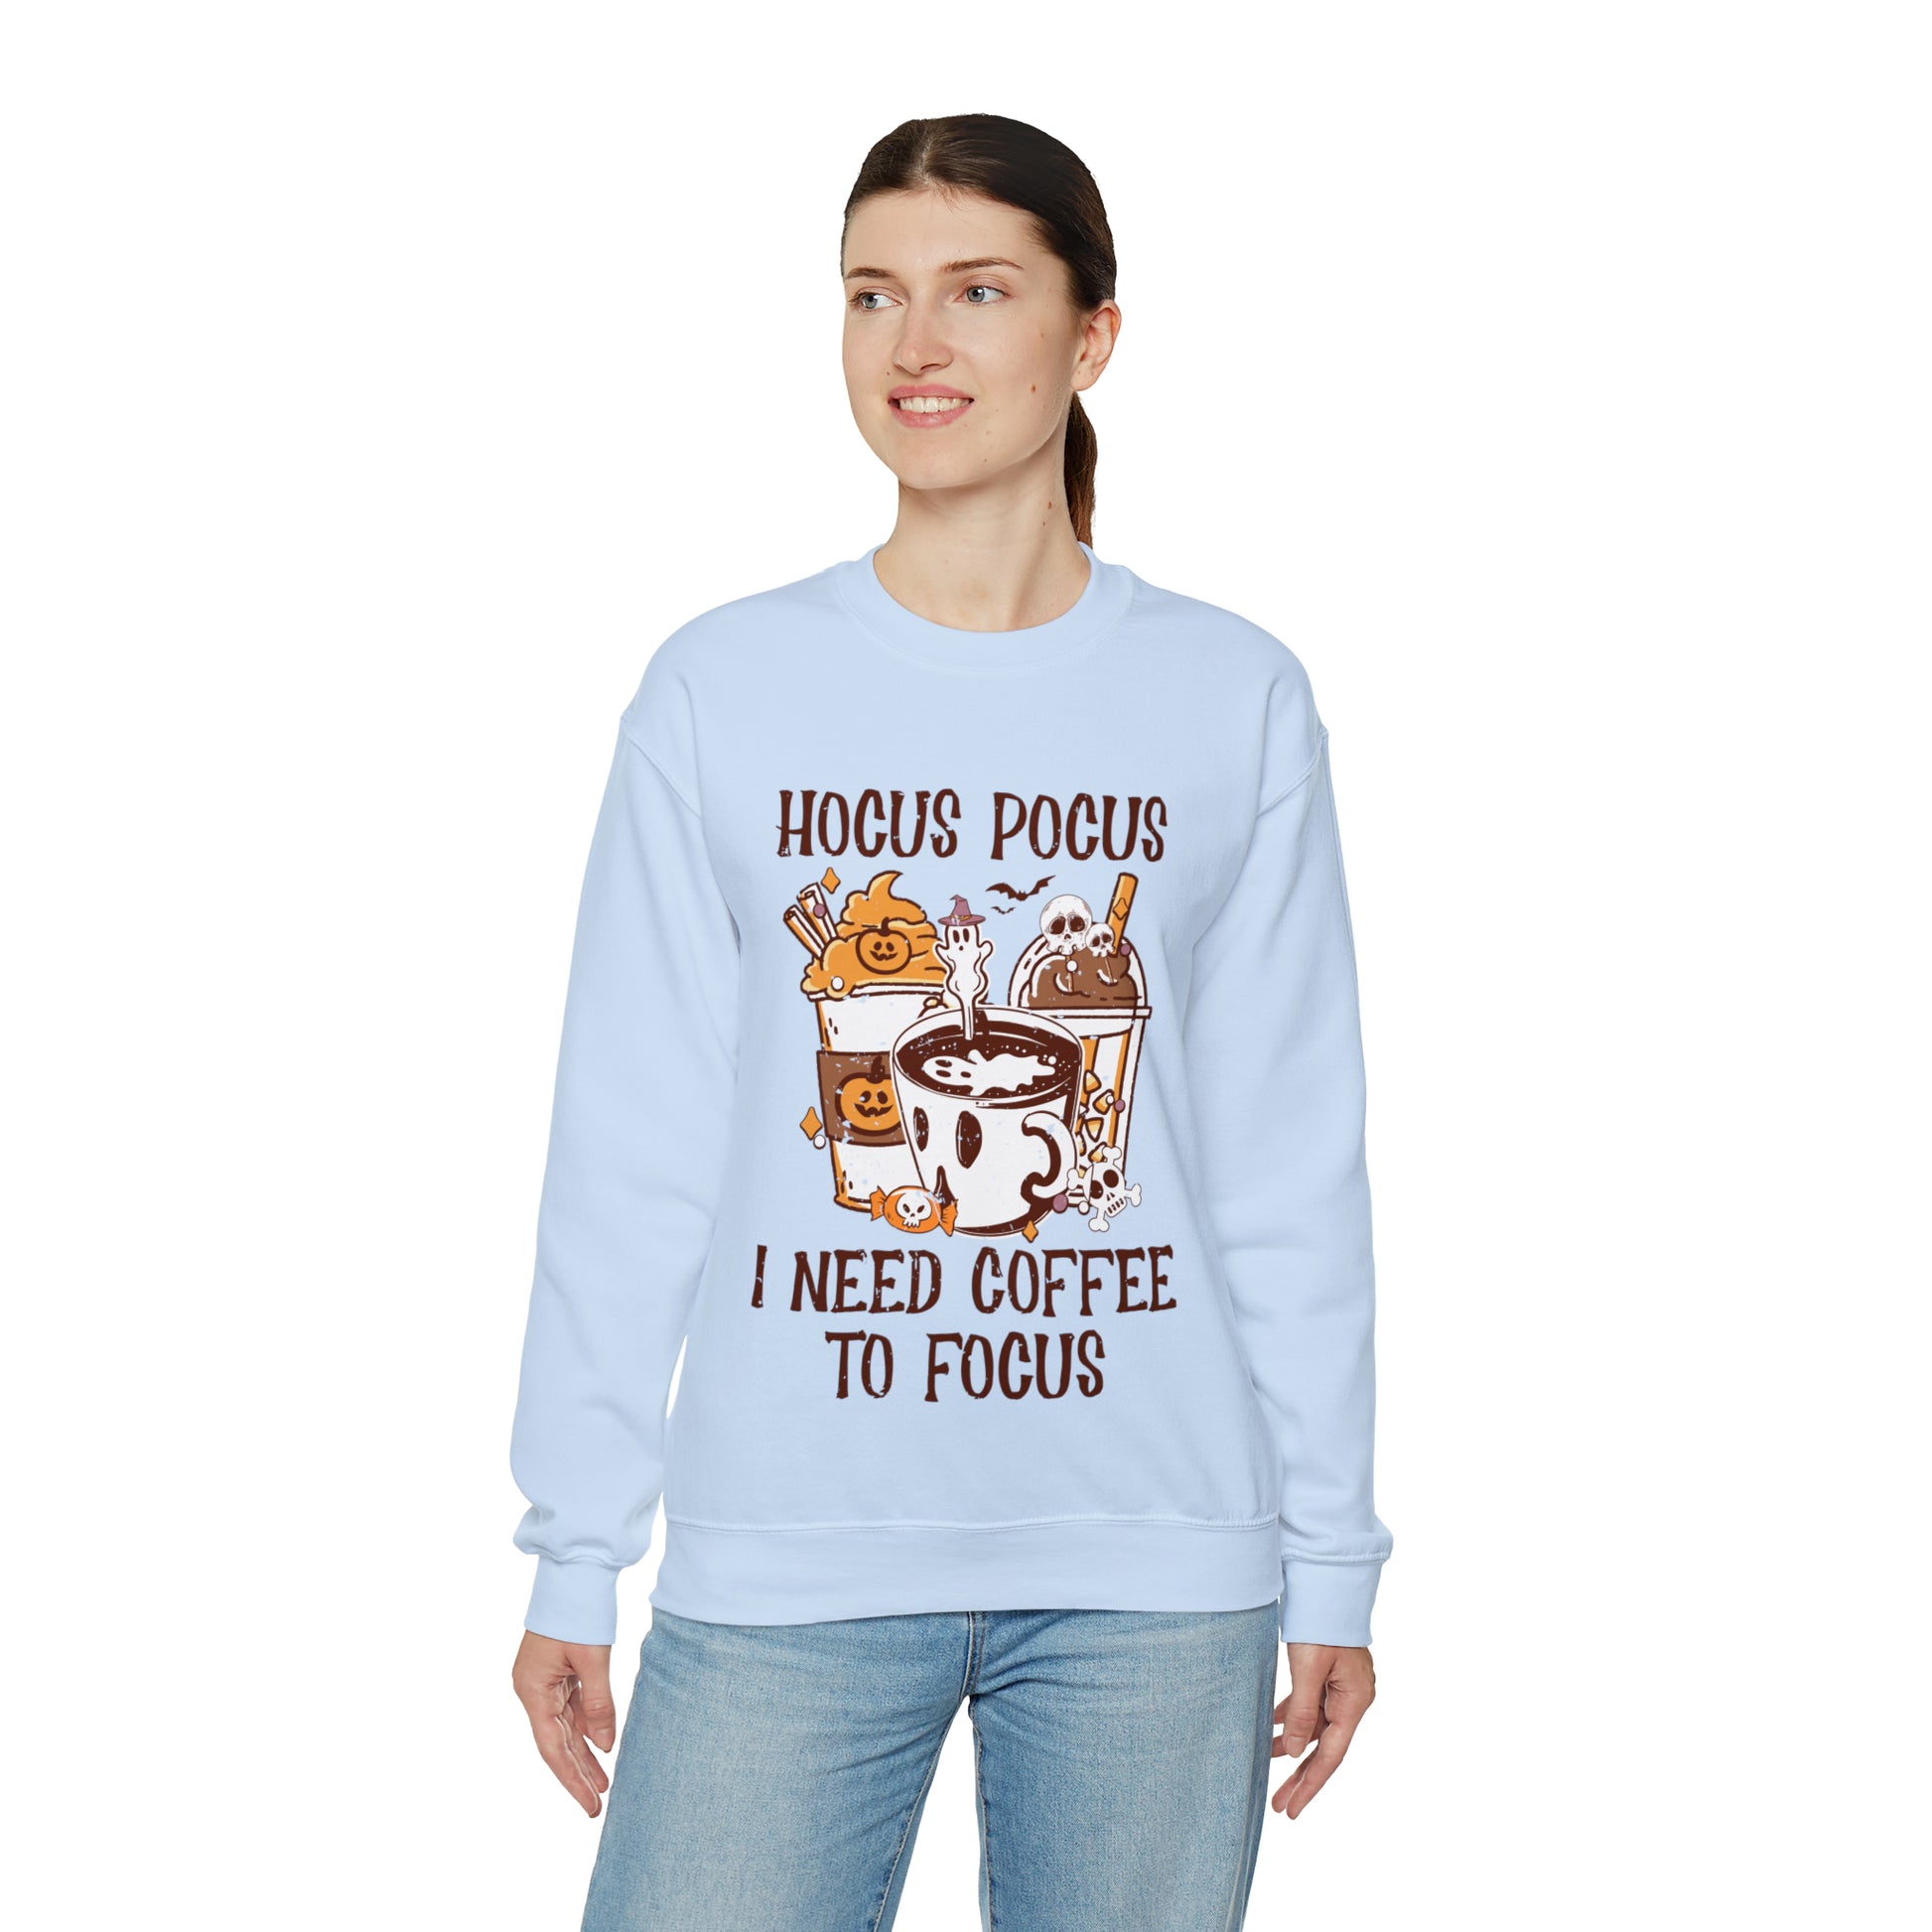 "Hocus Pocus I Need Coffee To Focus" Sweatshirt - Weave Got Gifts - Unique Gifts You Won’t Find Anywhere Else!